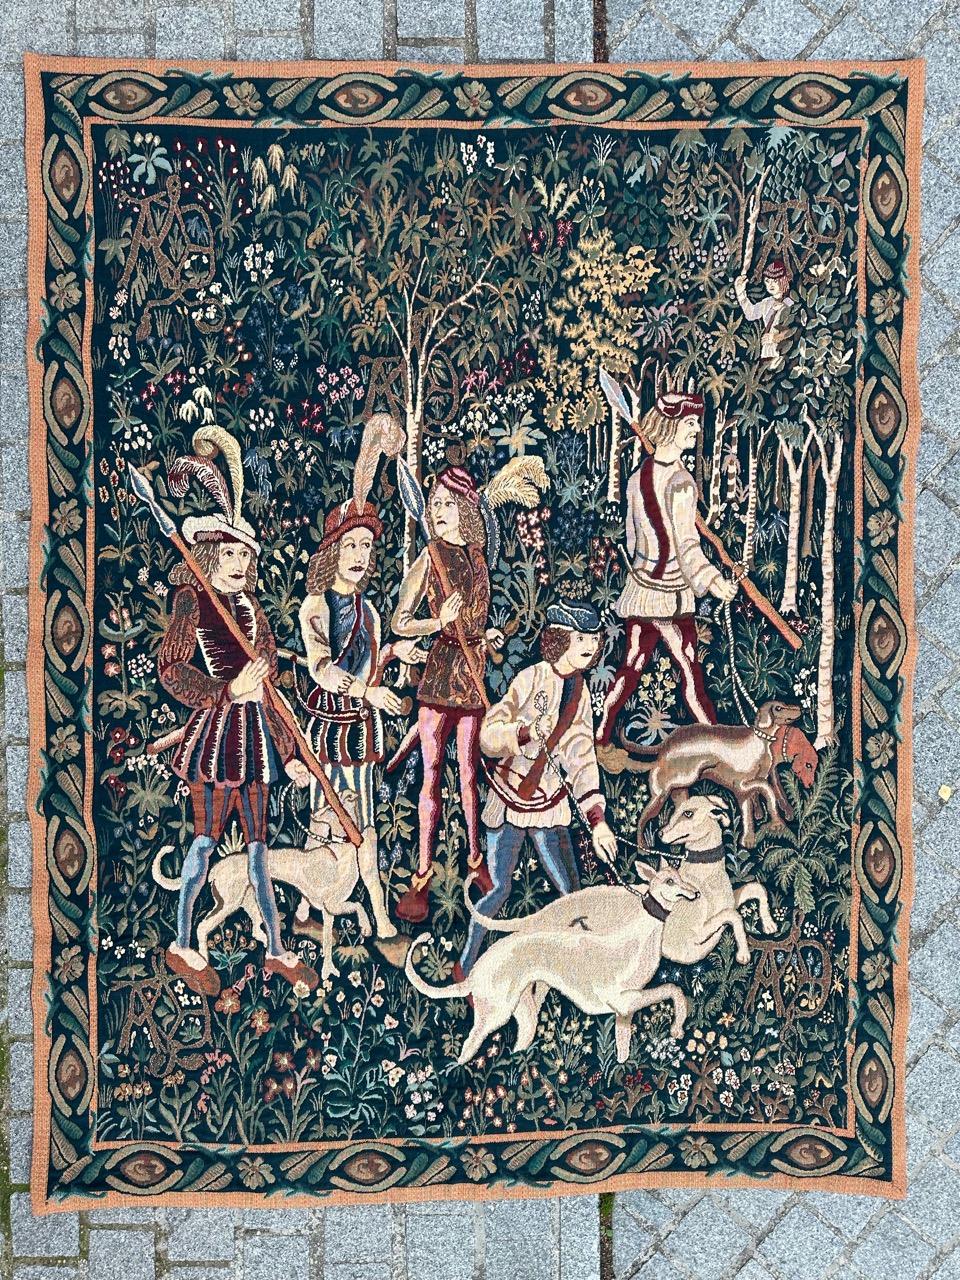 Very pretty mid century French tapestry with nice medieval design and beautiful colors, mechanical Jaquar manufacturing woven with wool and cotton.

✨✨✨
